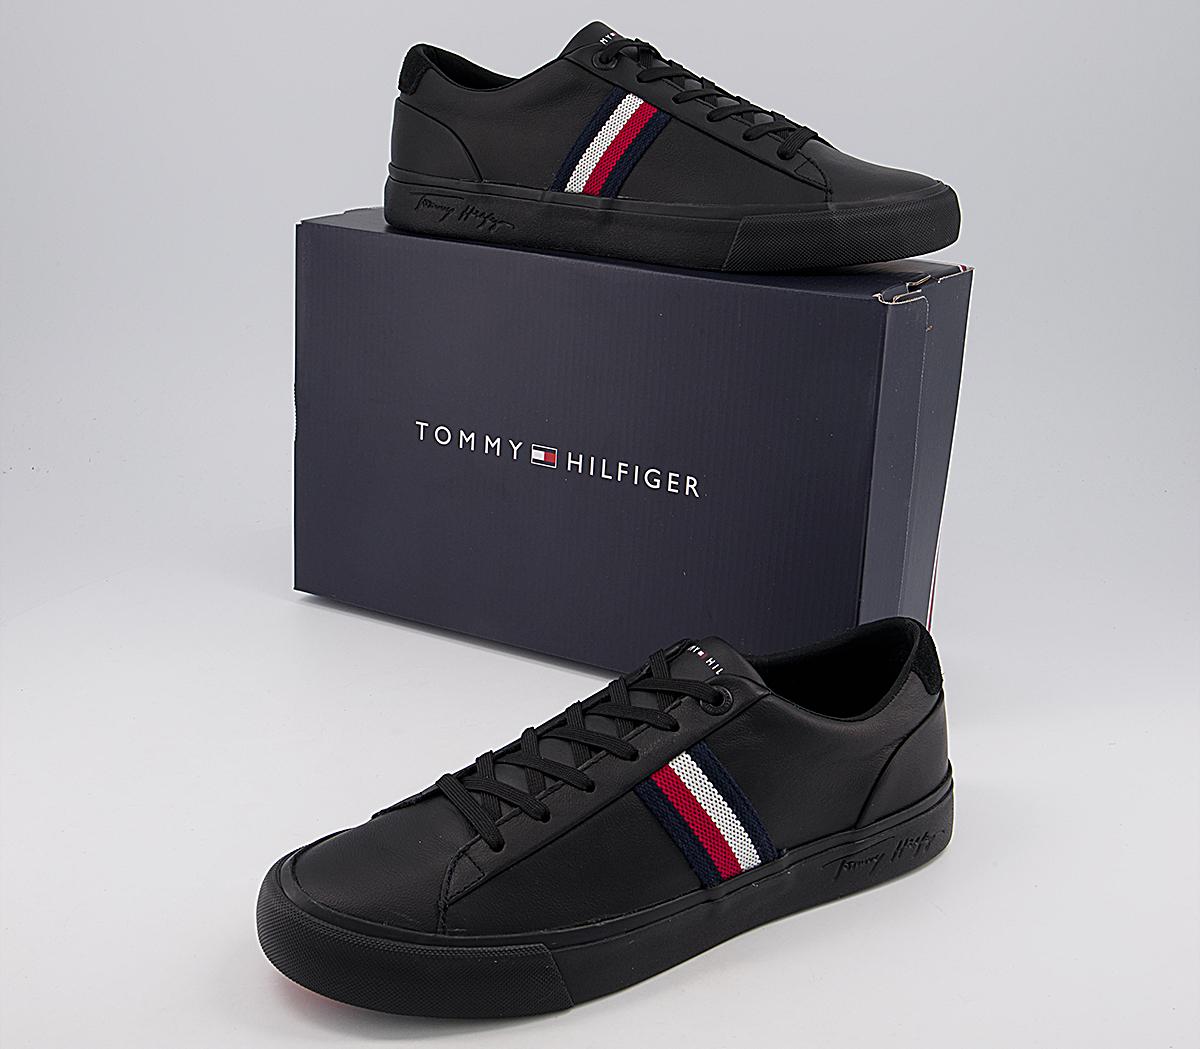 Tommy Hilfiger Corporate Leather Sneakers Black Mono - His trainers